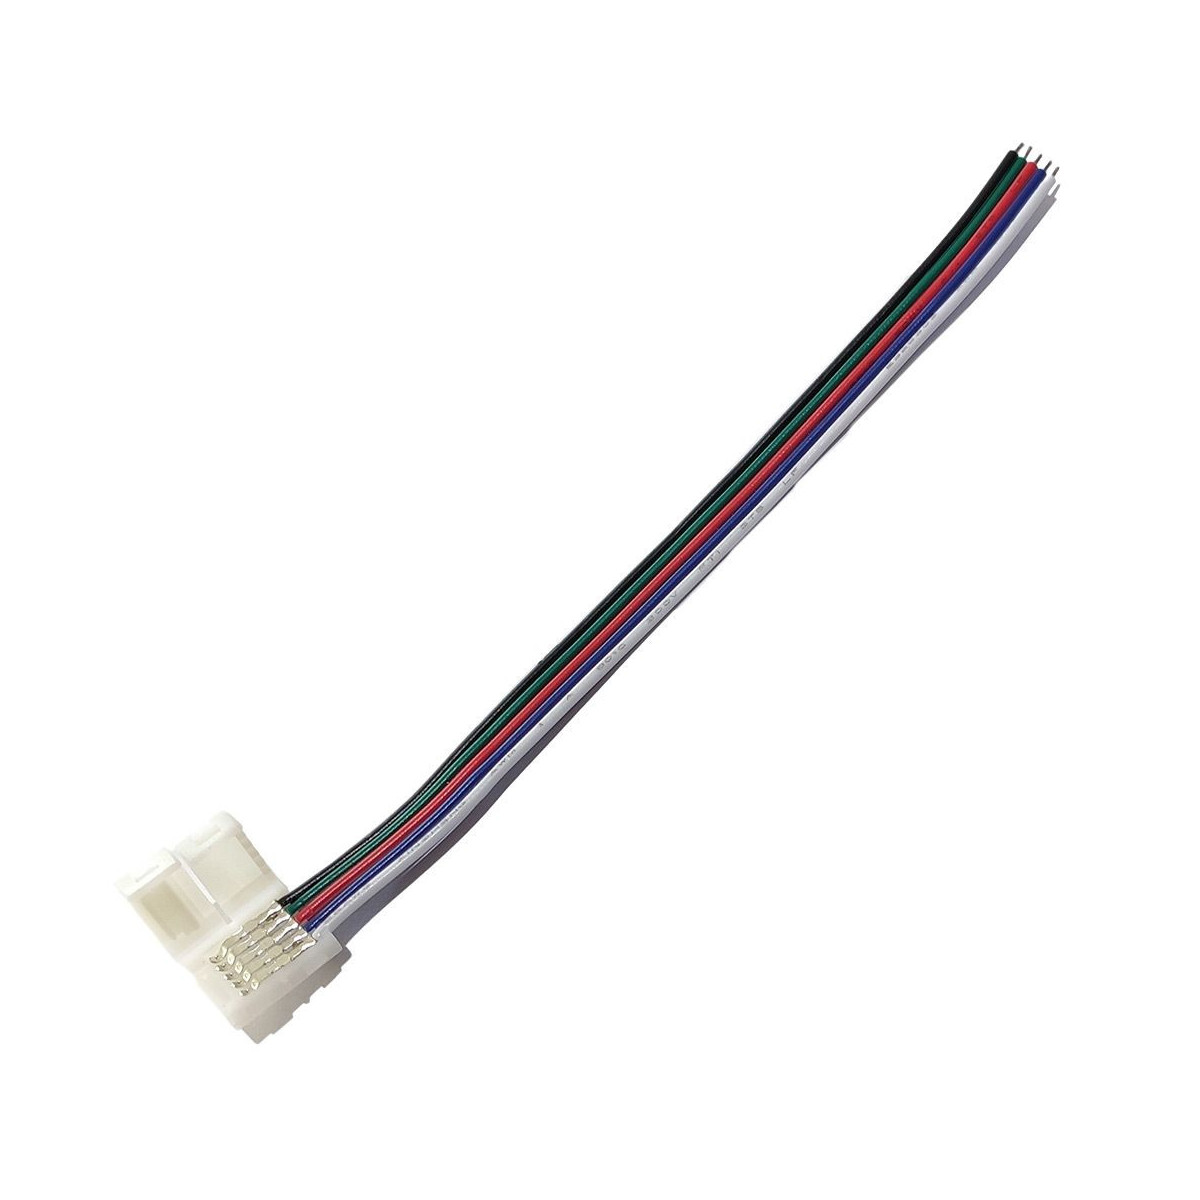 Connector Cable for RGBW (5 pin) LED Strips - 10mm